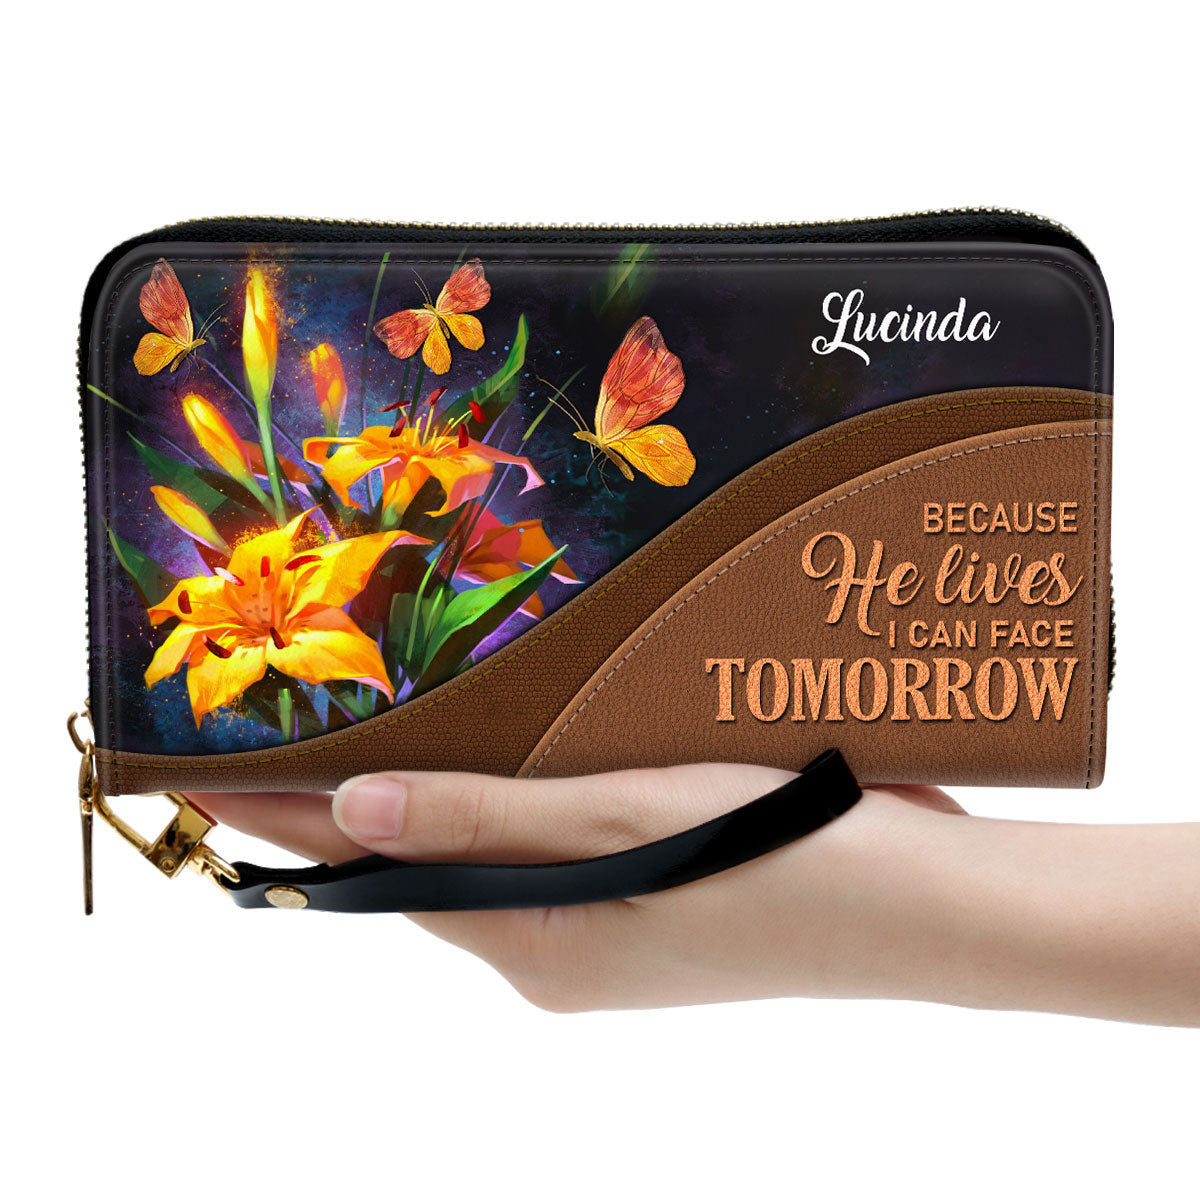 Because He Lives, I Can Face Tomorrow - Unique Personalized Clutch Purse - Women Clutch Purse